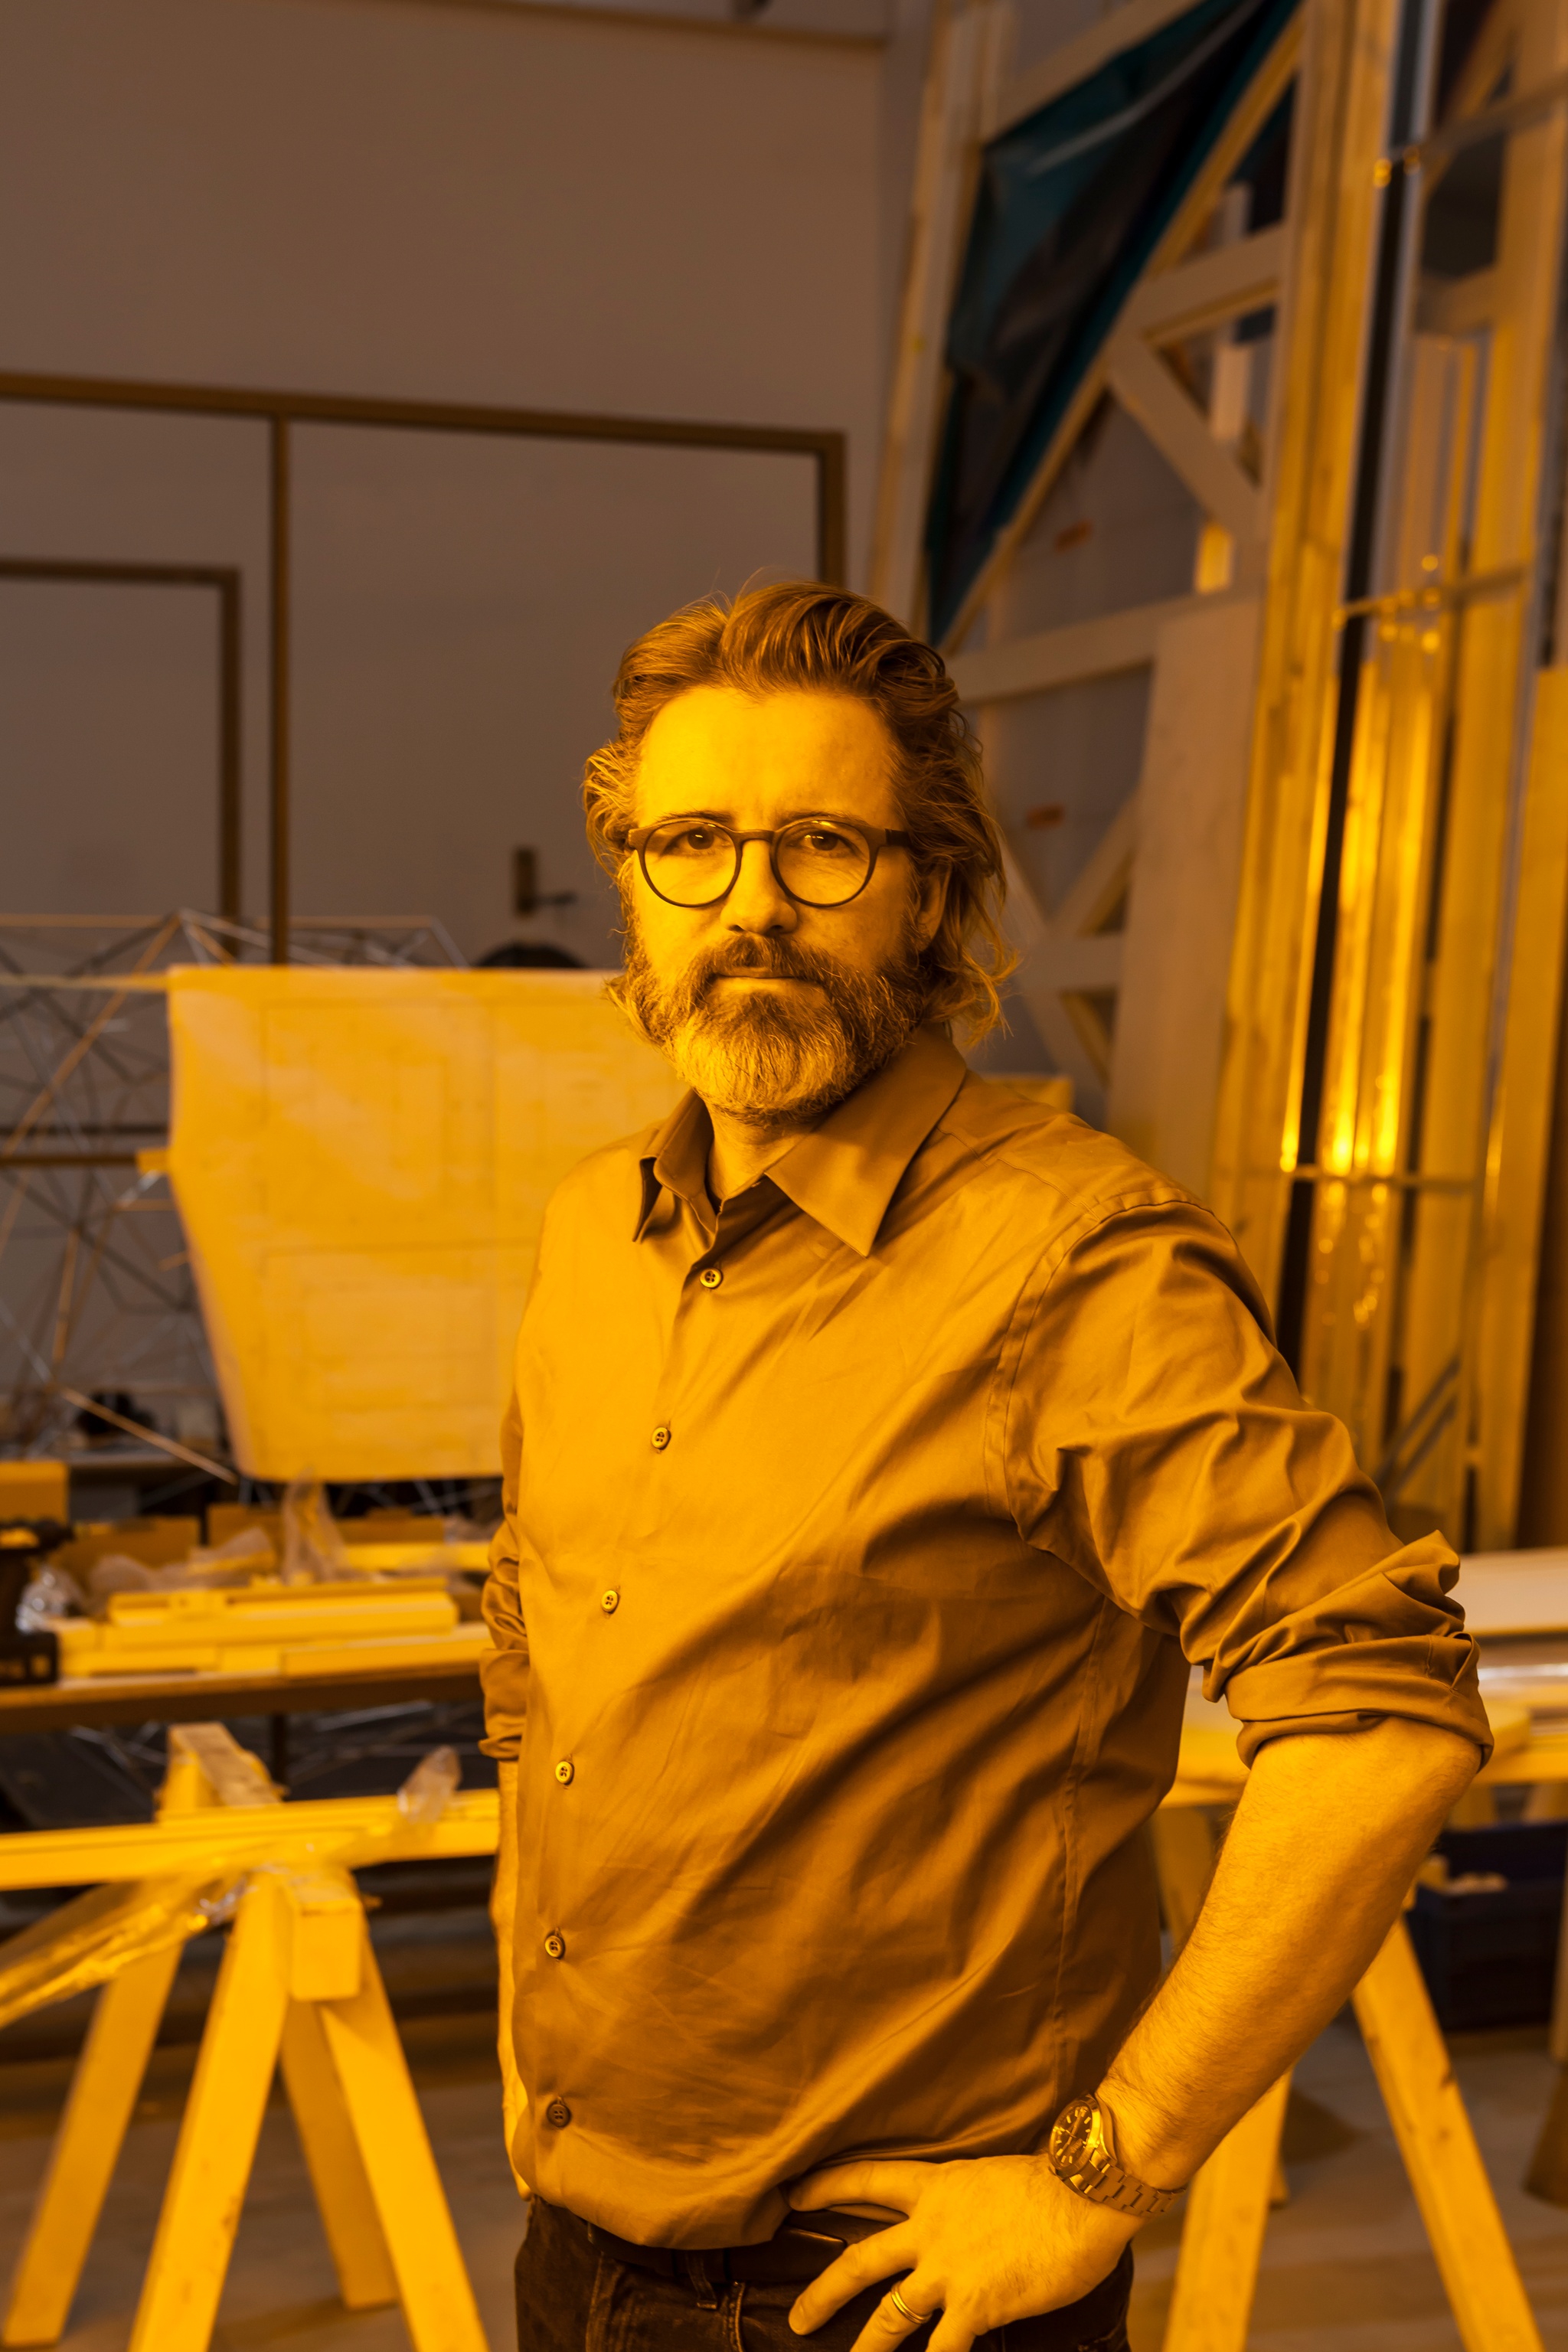 A white man in glasses with a medium length gray beard and long hair swiped back stands in a studio space with hands on his hips.